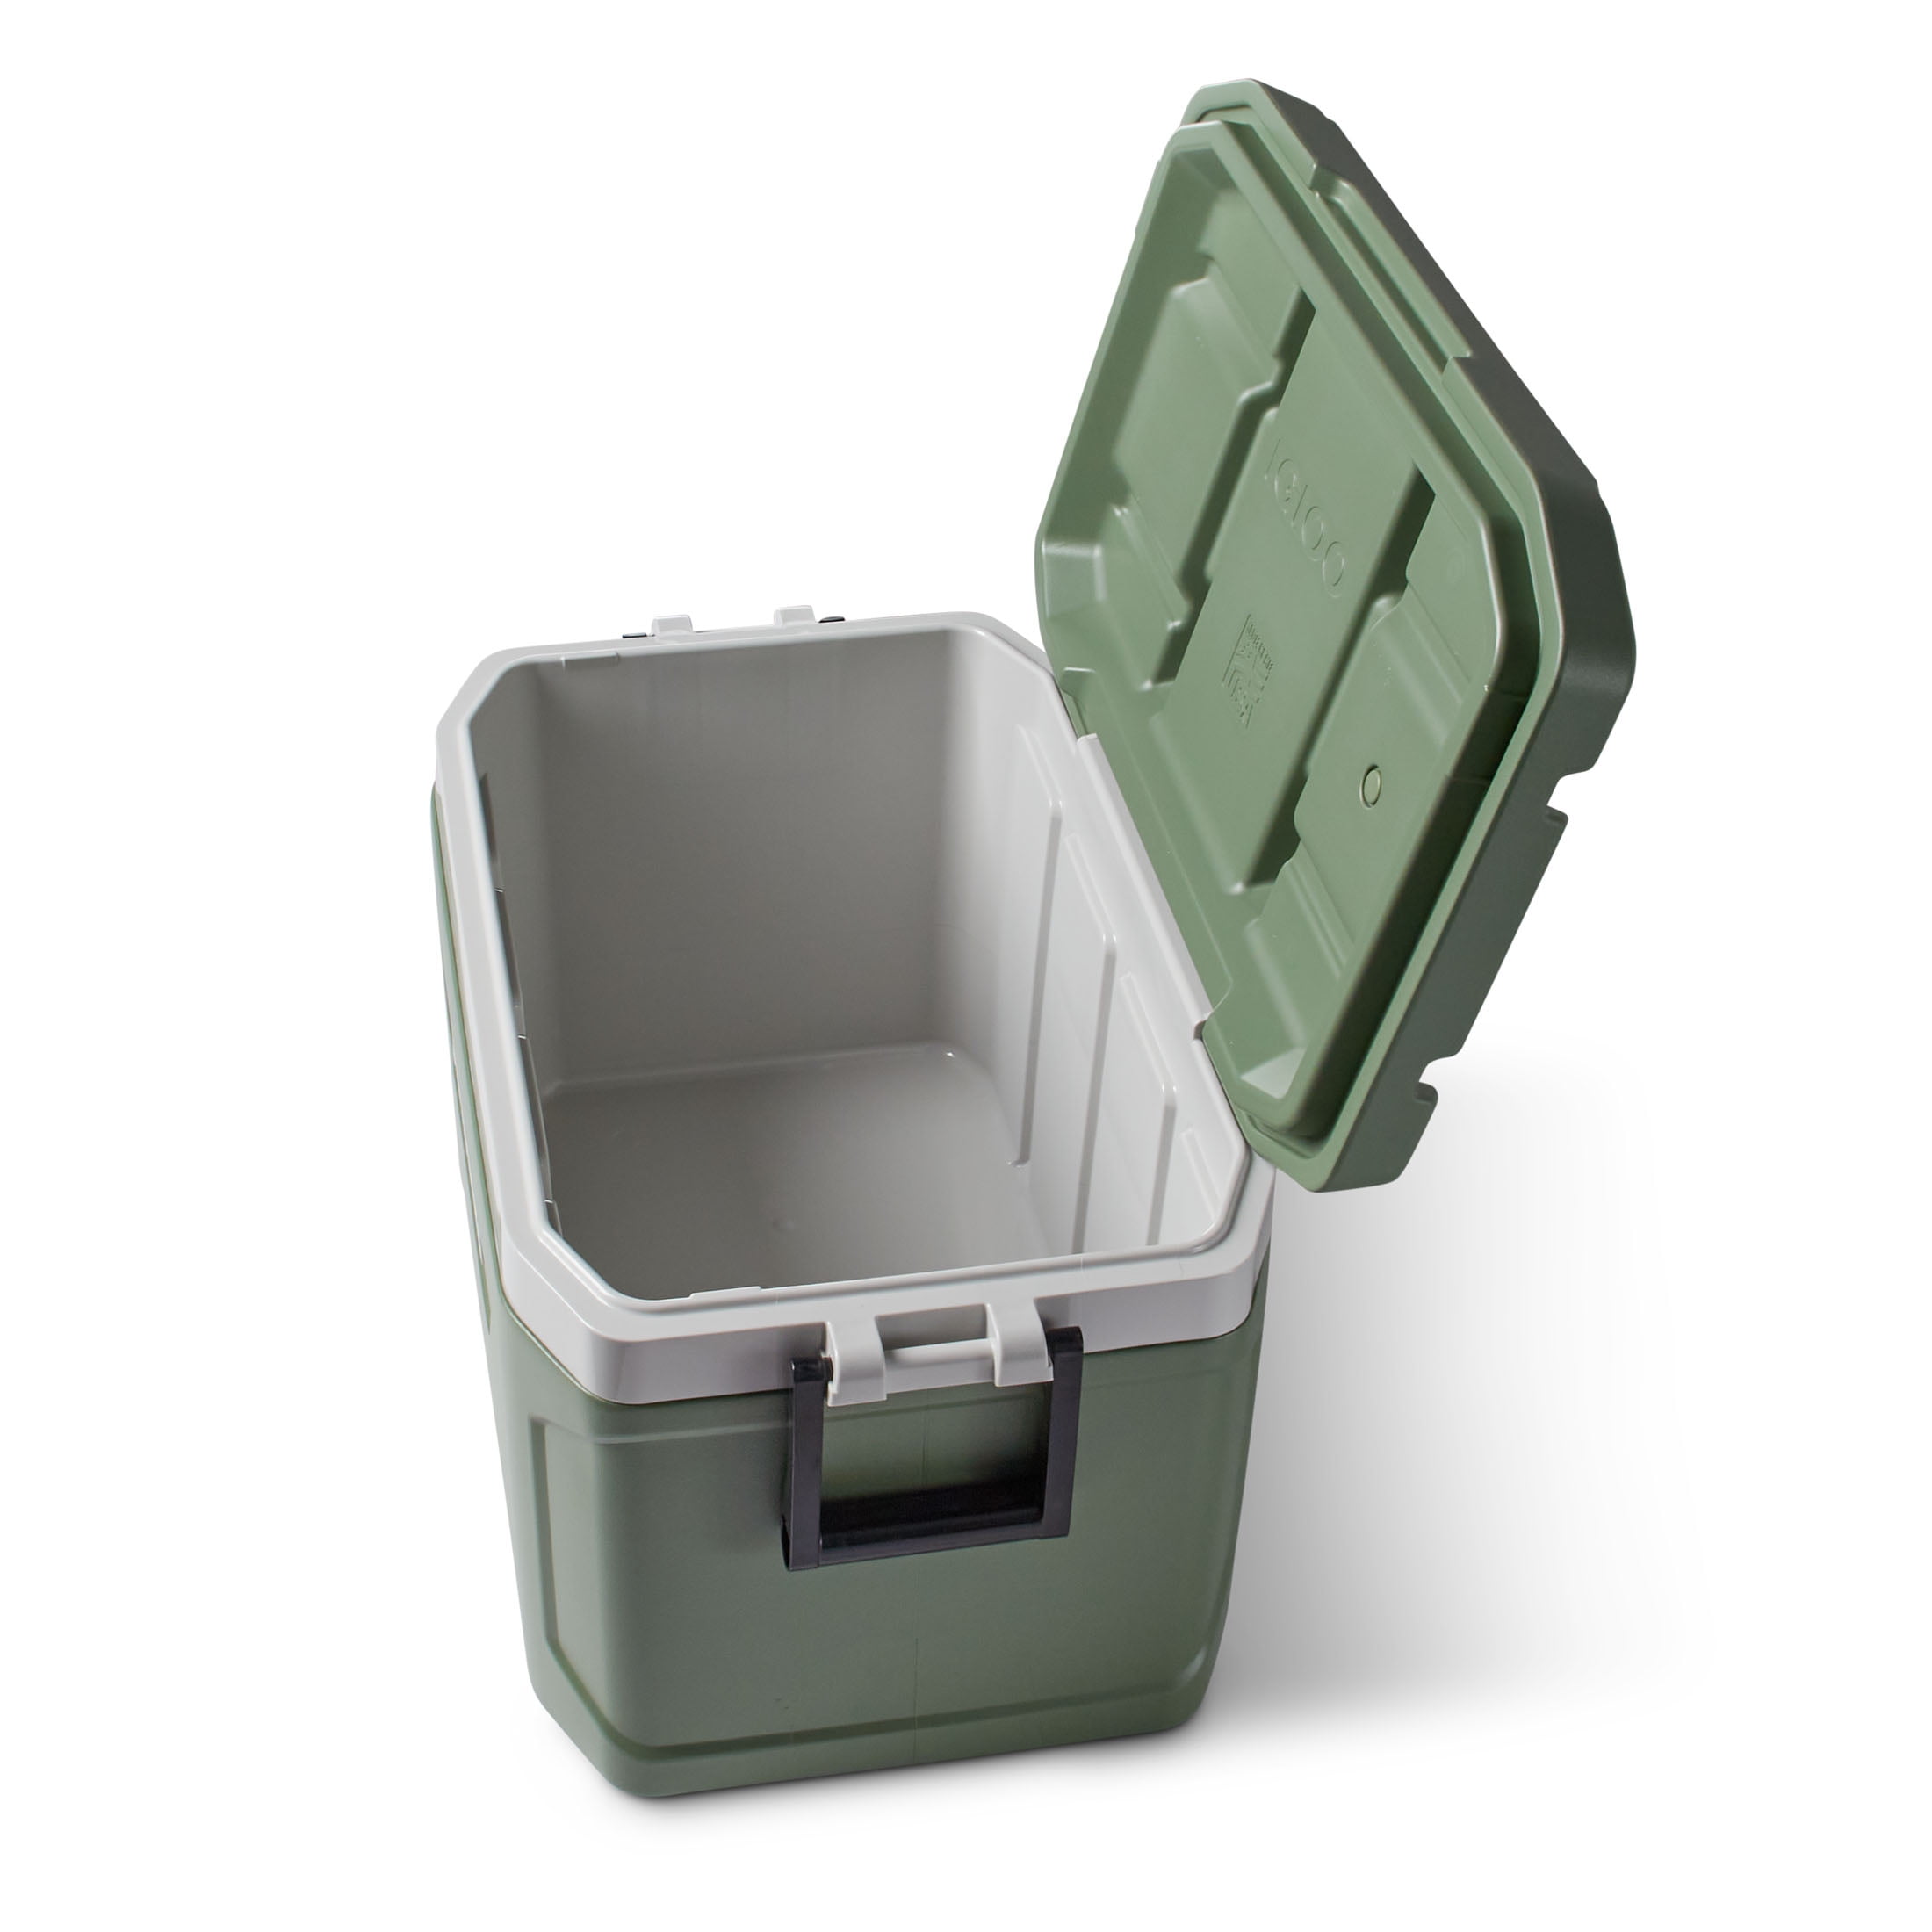 Stanley The Easy Carry Outdoor Cooler 15.1L, green